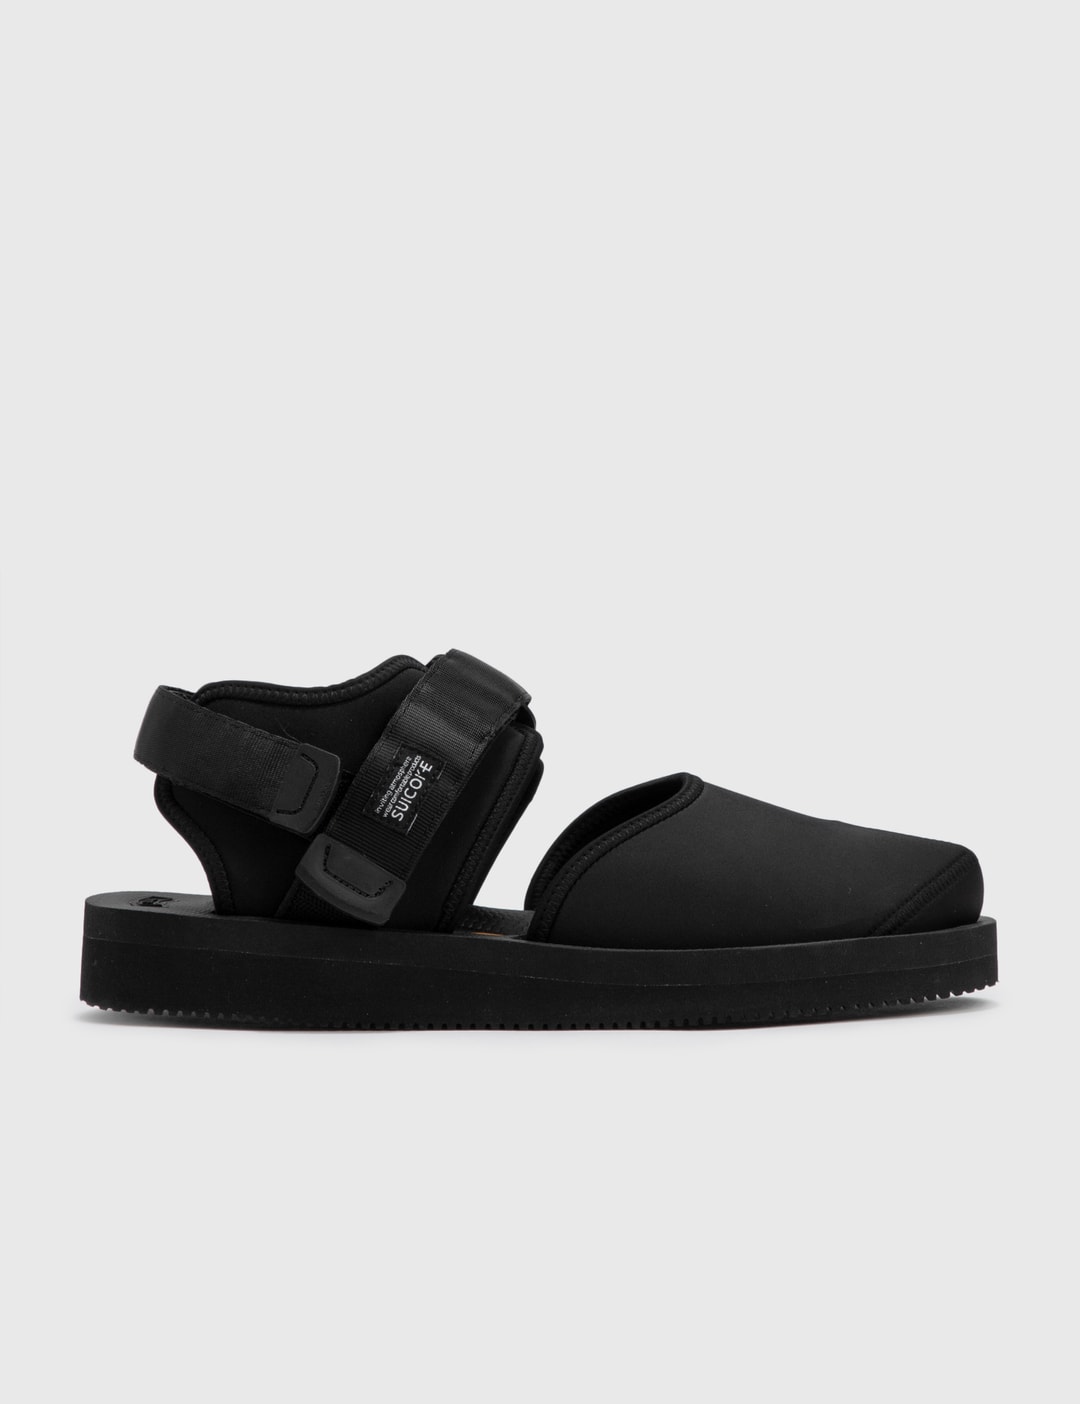 Palm Angels - Palm Angels x Suicoke Slider  HBX - Globally Curated Fashion  and Lifestyle by Hypebeast